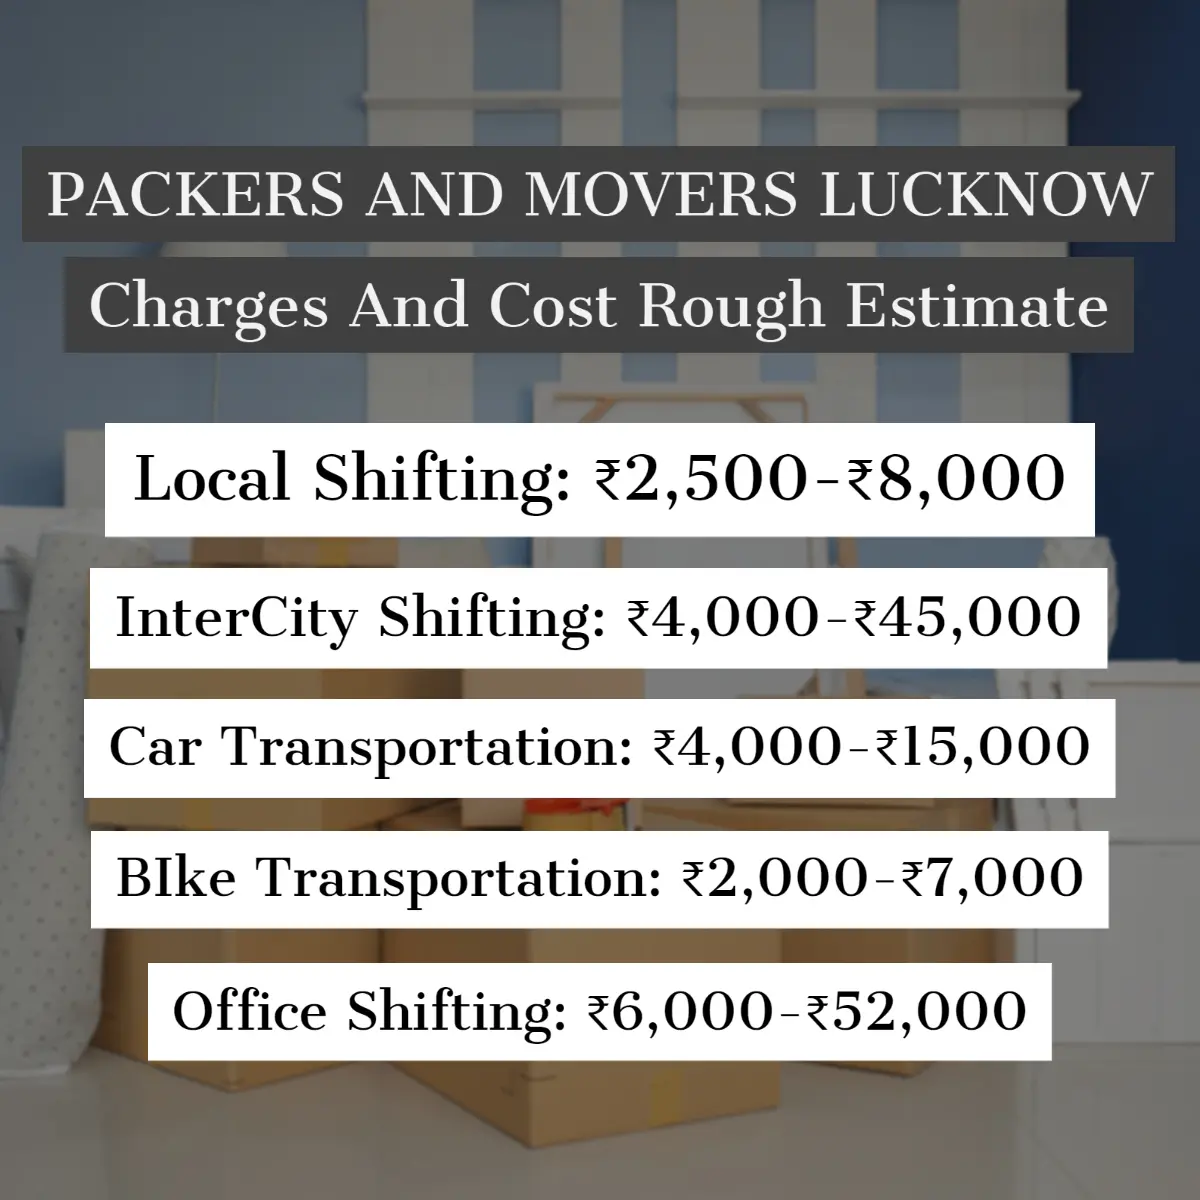 Packers and Movers Lucknow Charges